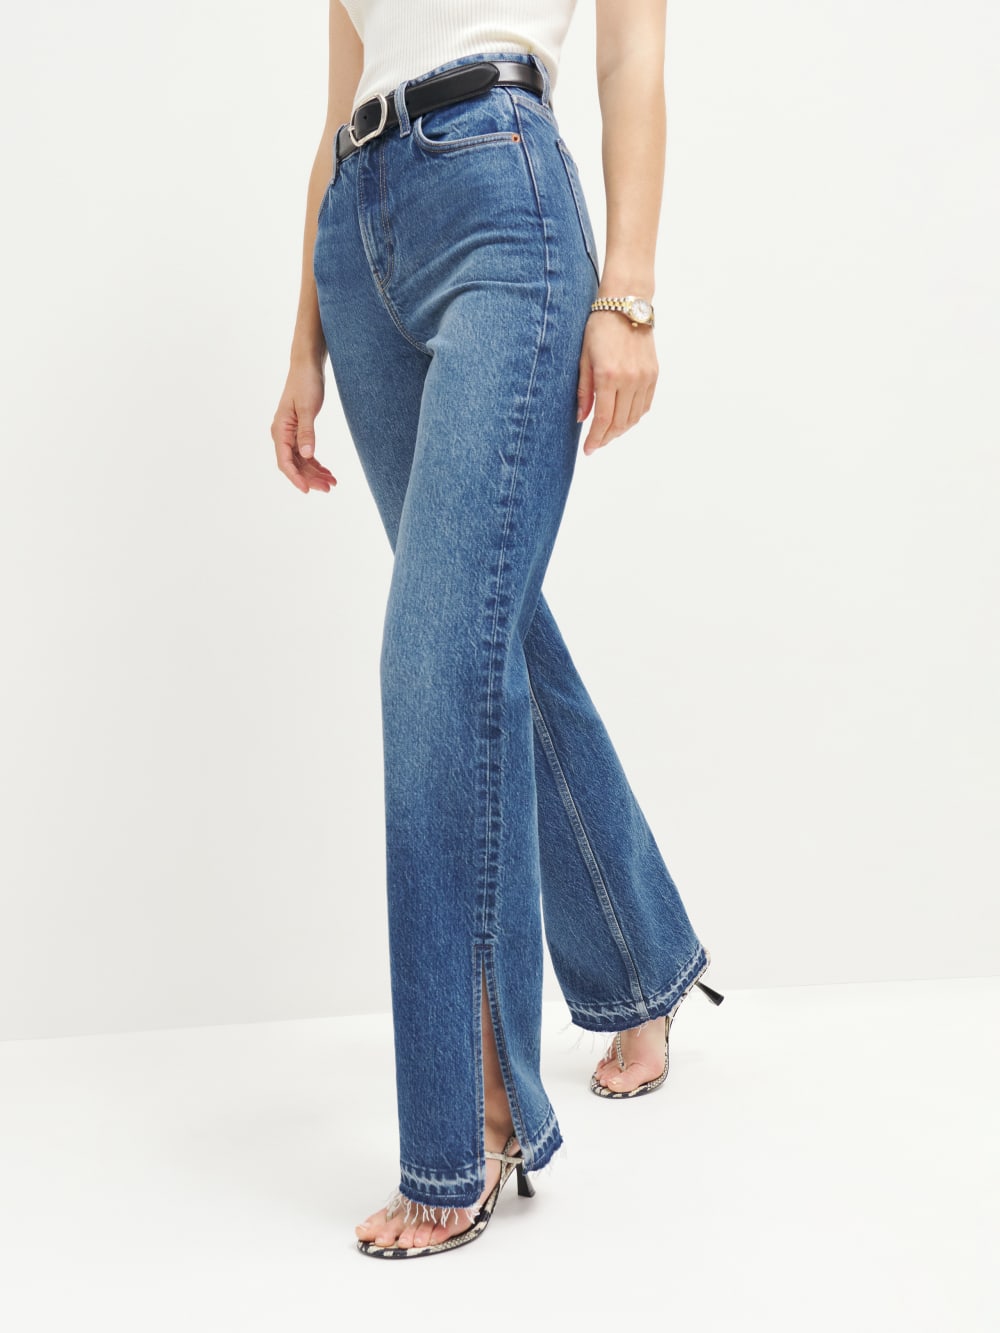 Shop all the jeans you need in your wardrobe: Wide-leg, straight ...